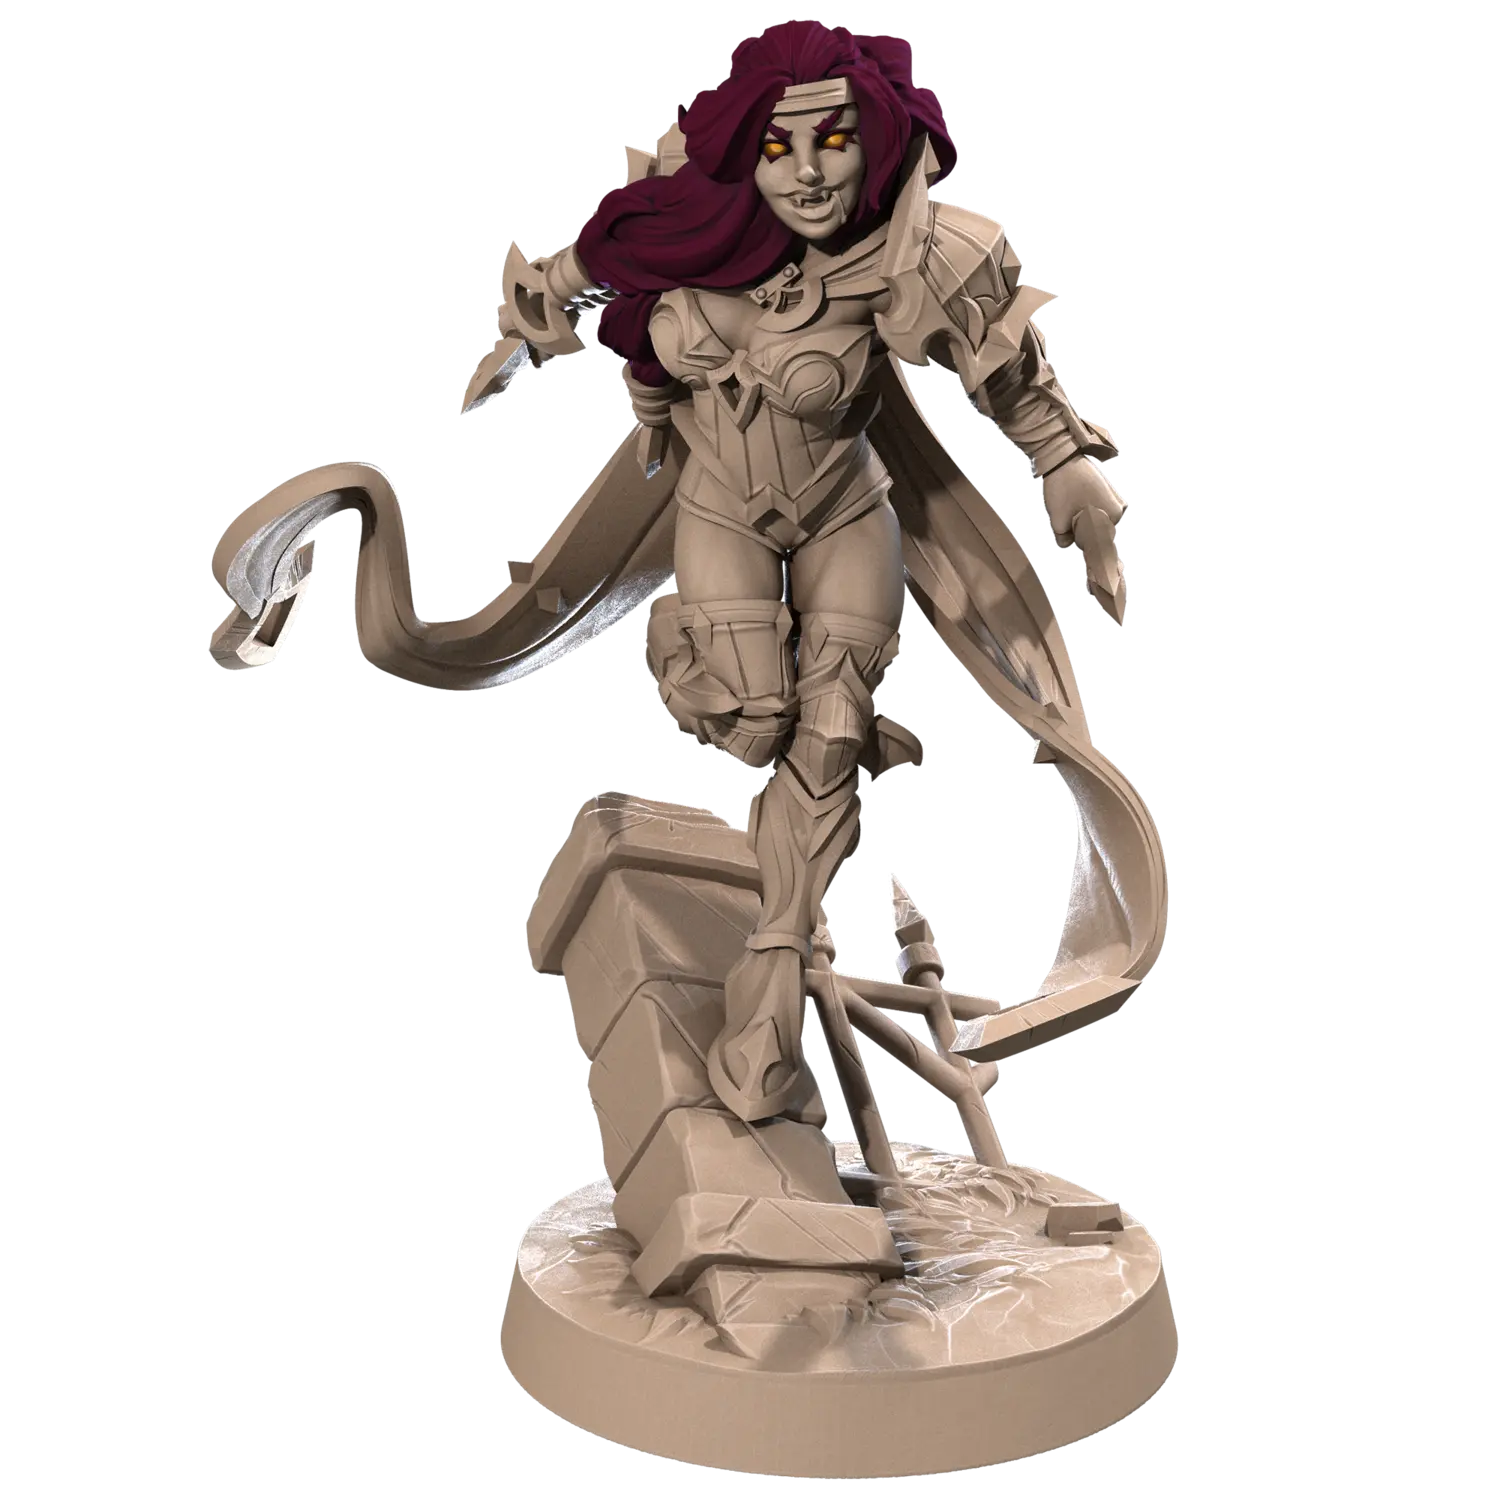 DnD Elf - Human - Miniature - Monsters - Rogue - Vampires Vivienne Darkwood 03 Elf - Human - Miniature - Monsters - Rogue - Vampires sold by DoubleHitShop